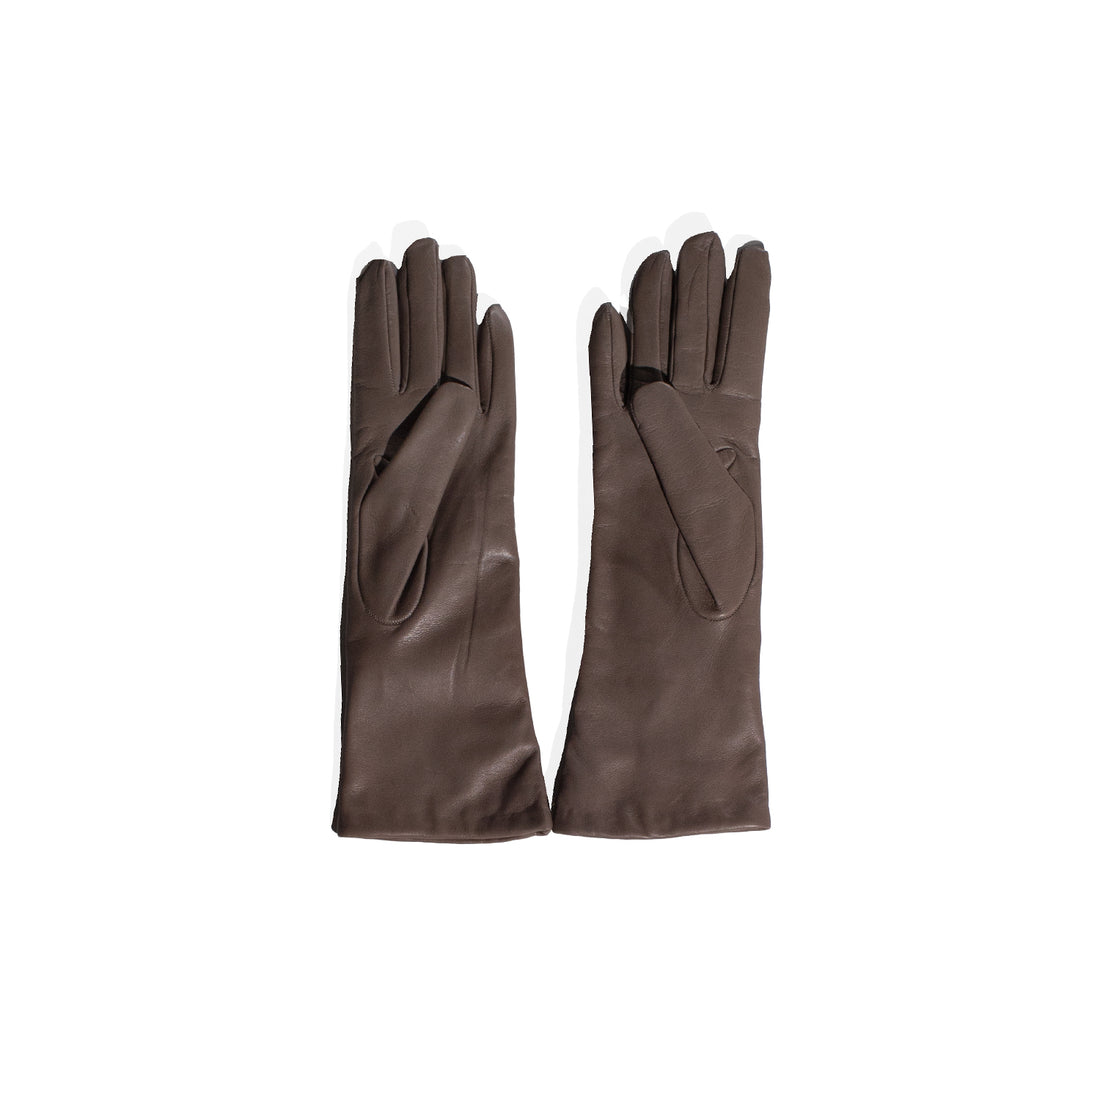 Clyde Classic Gloves in Taupe